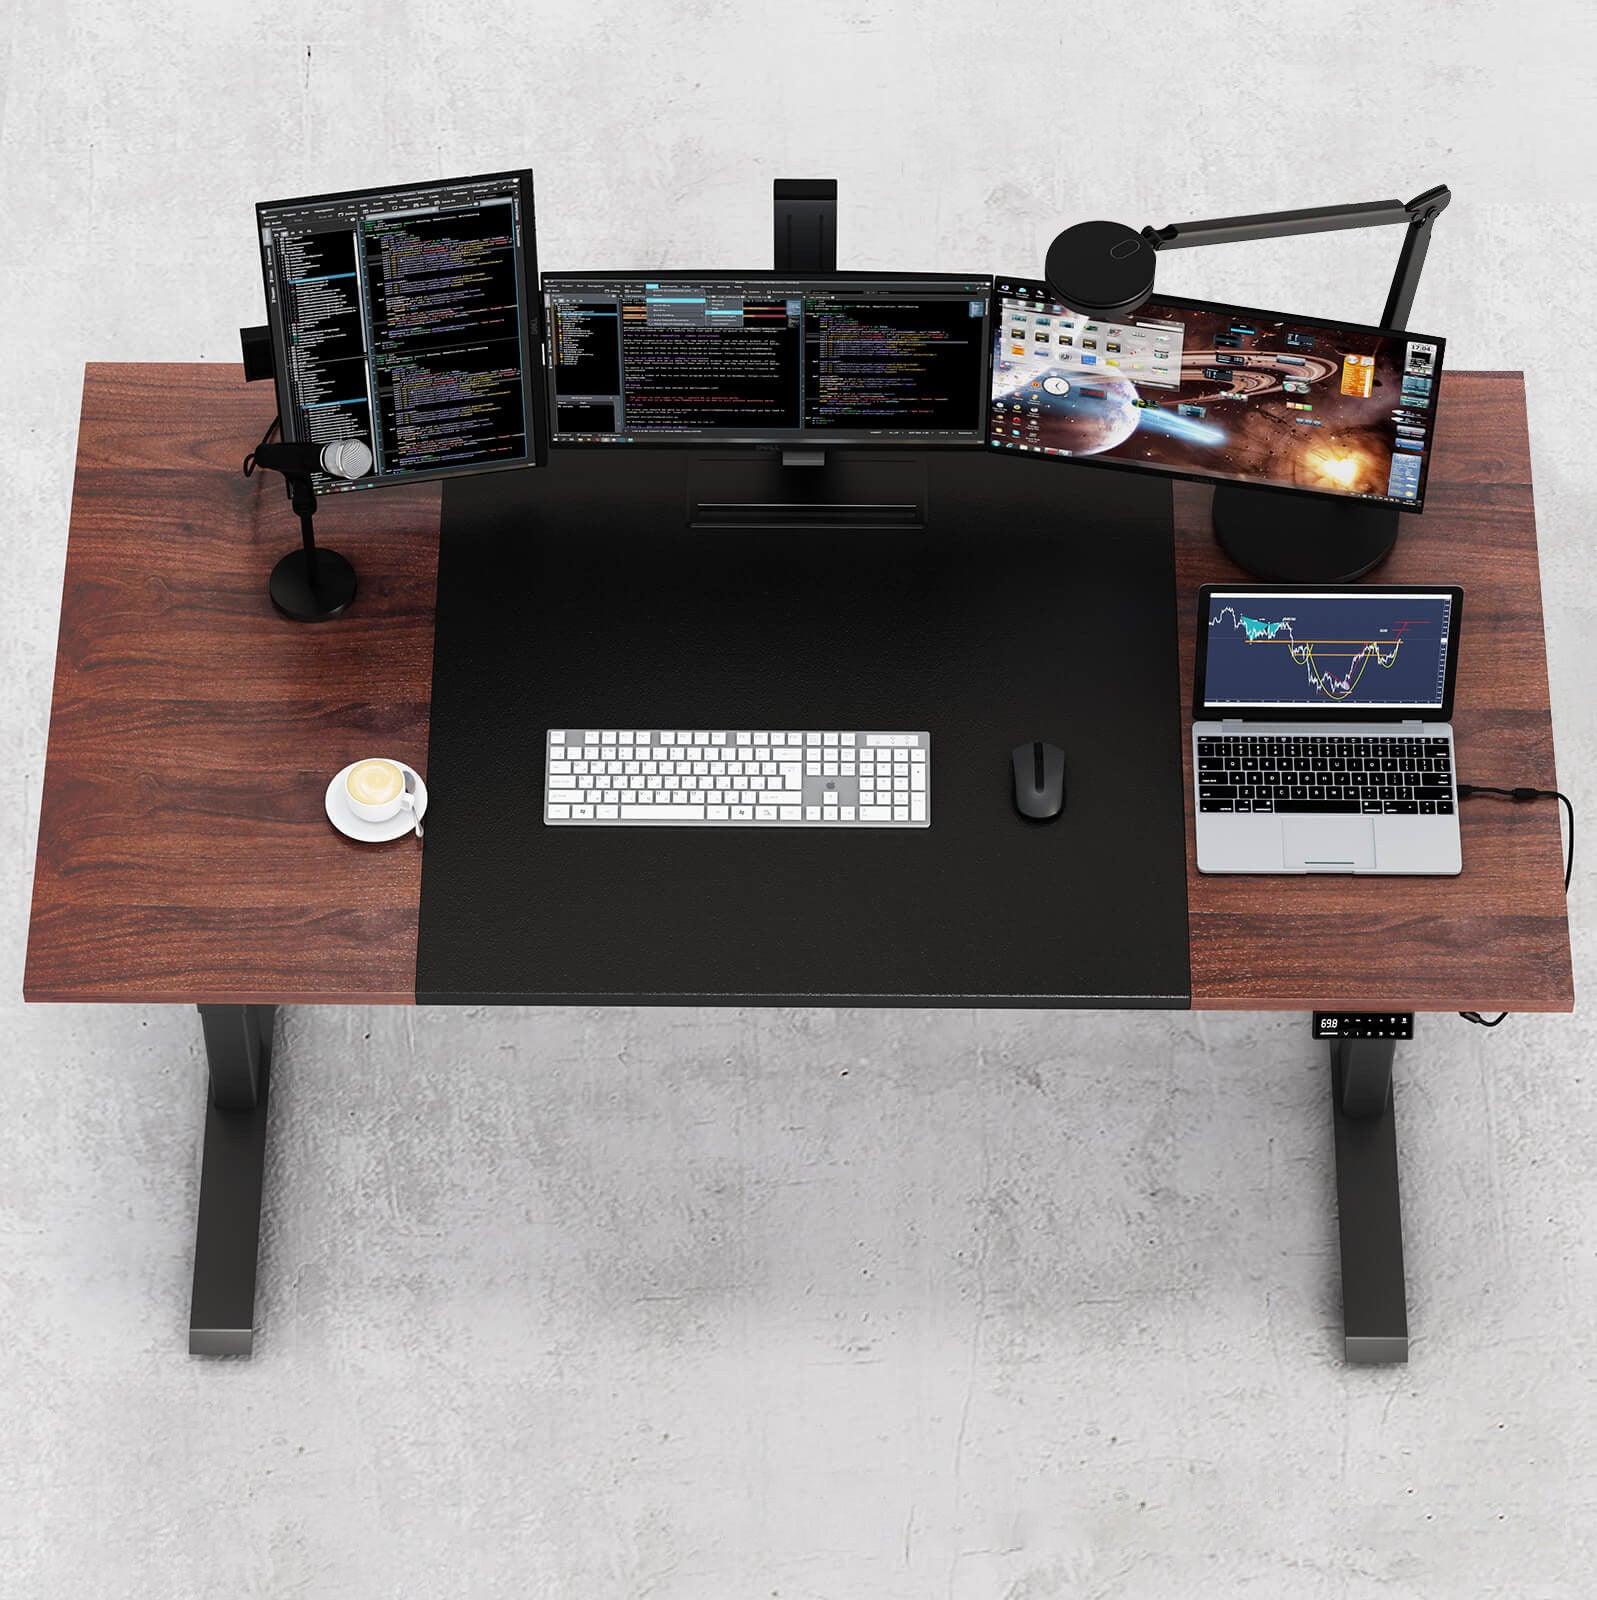 Maidesite 180x80cm computer desk is great for programmer and developer with multiple monitors use